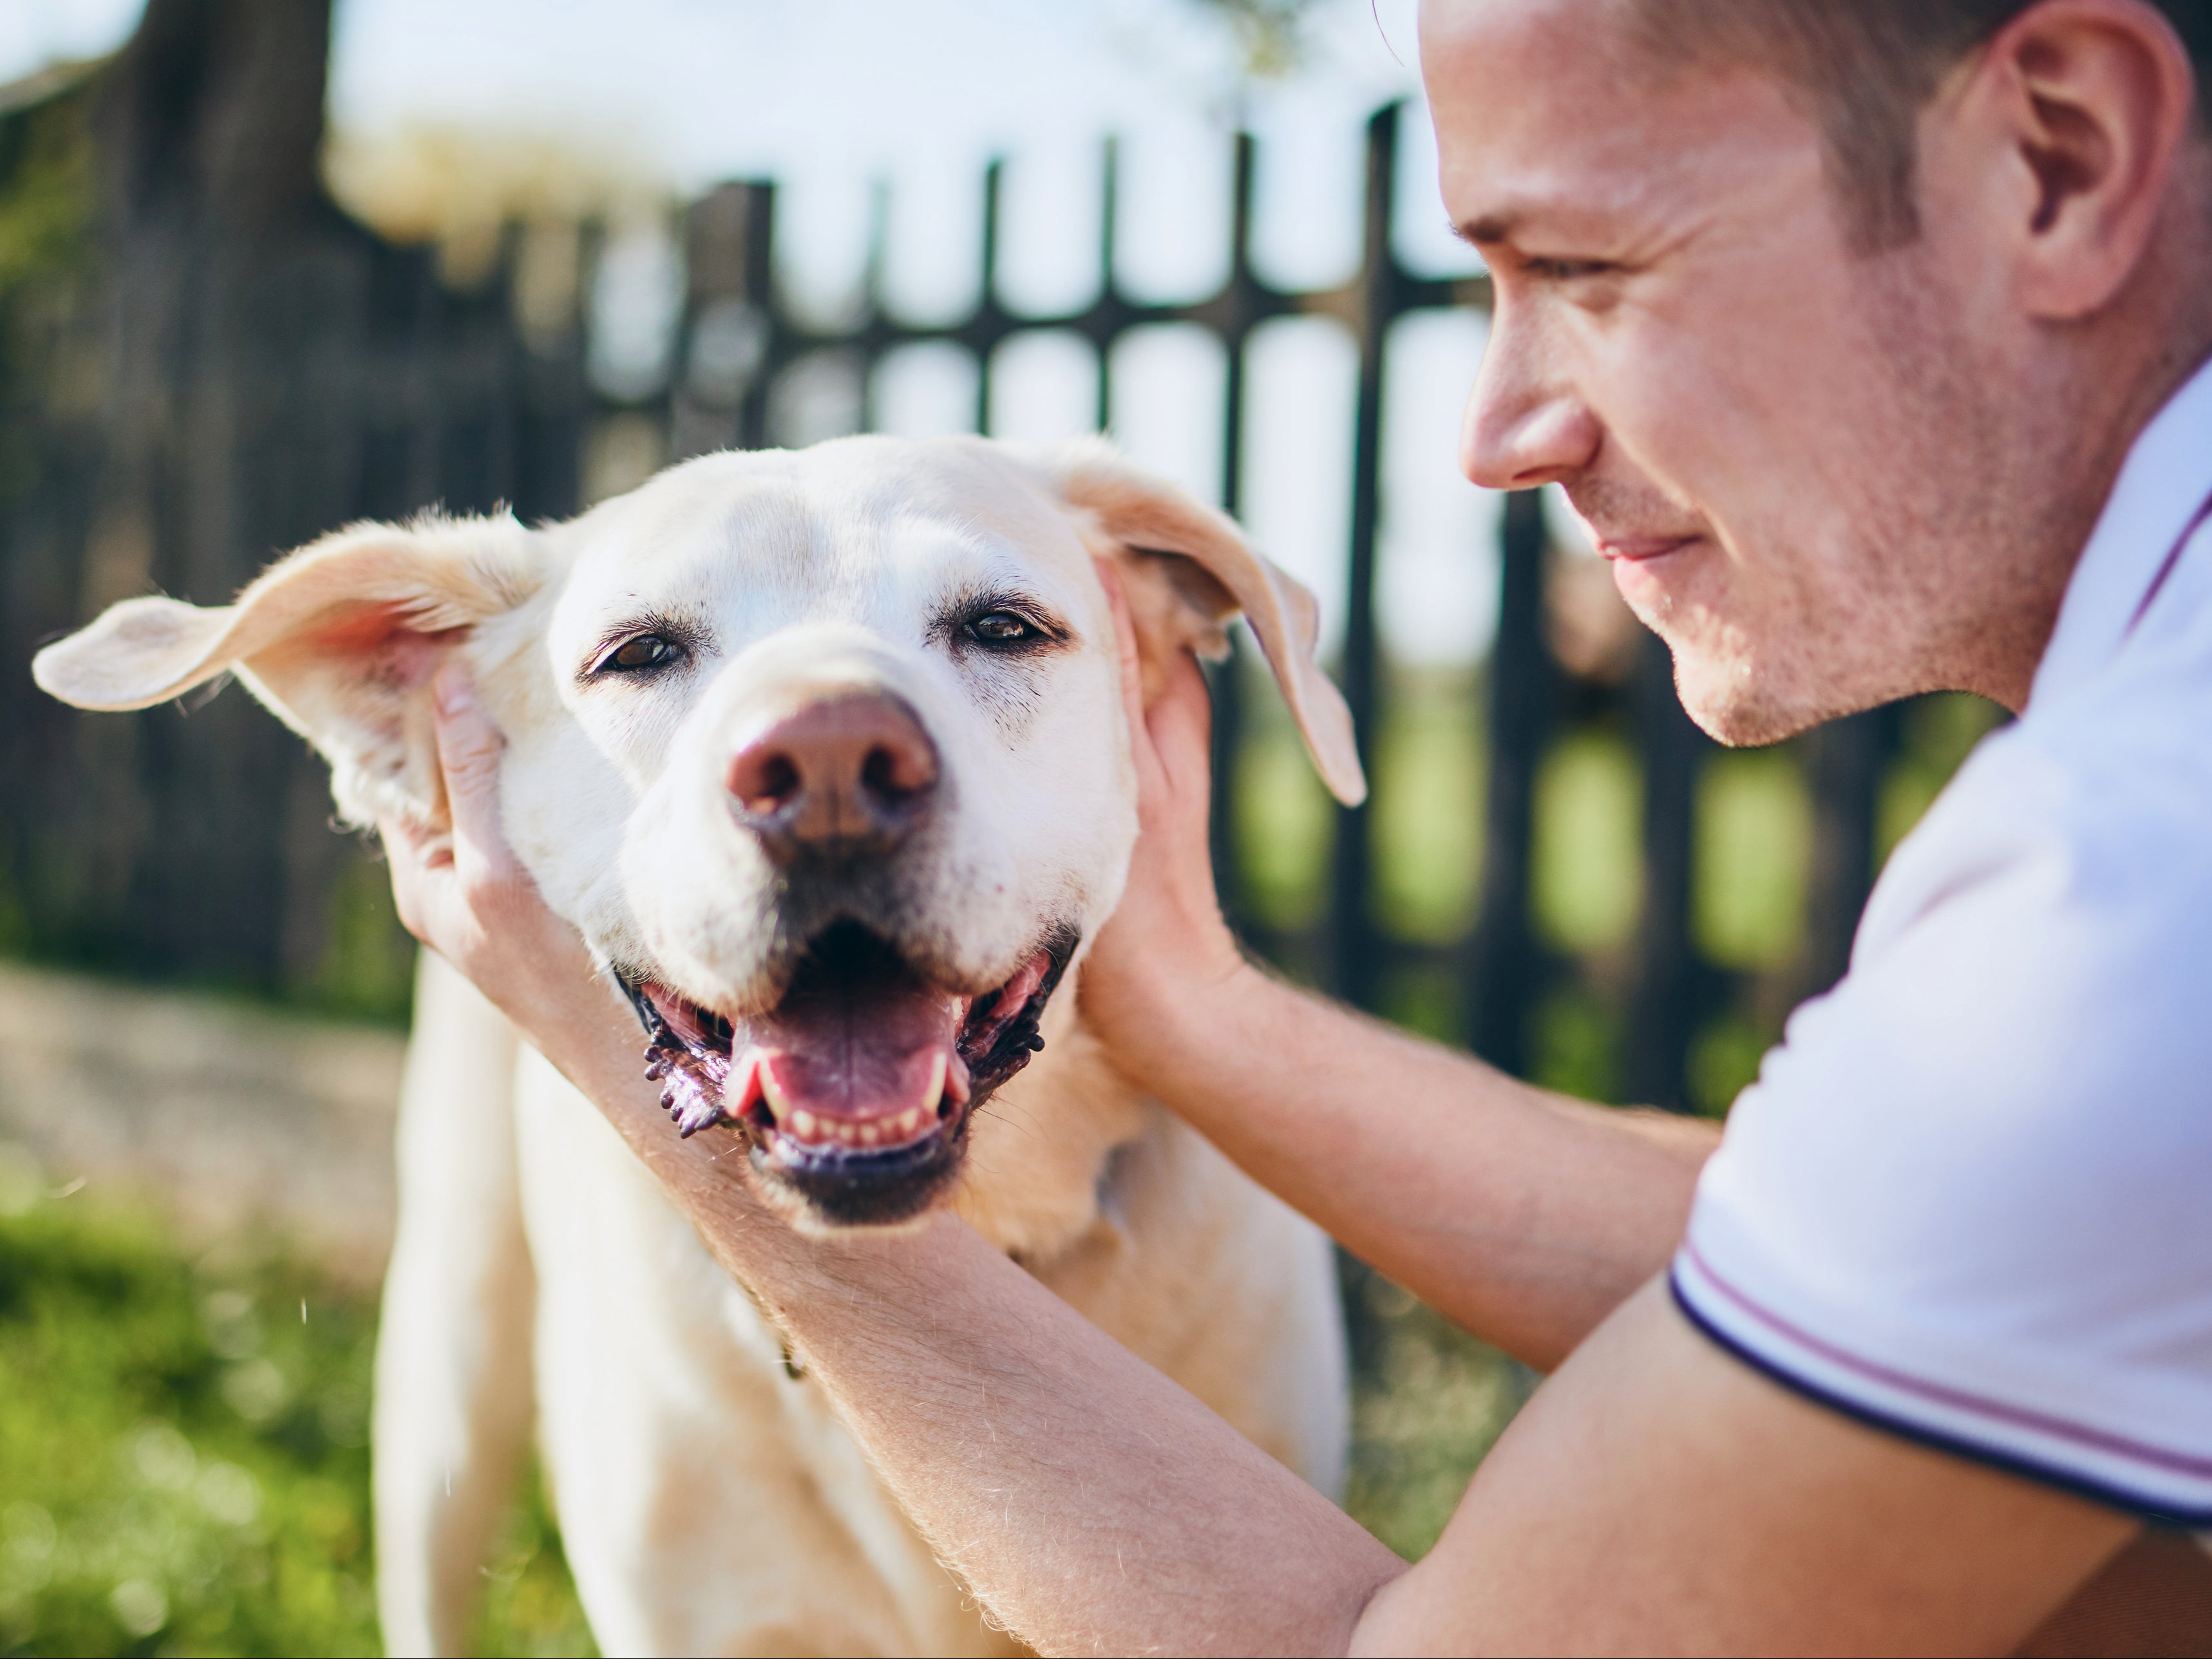 The study ‘helps to shed more light on the human-dog relationship’, say researchers